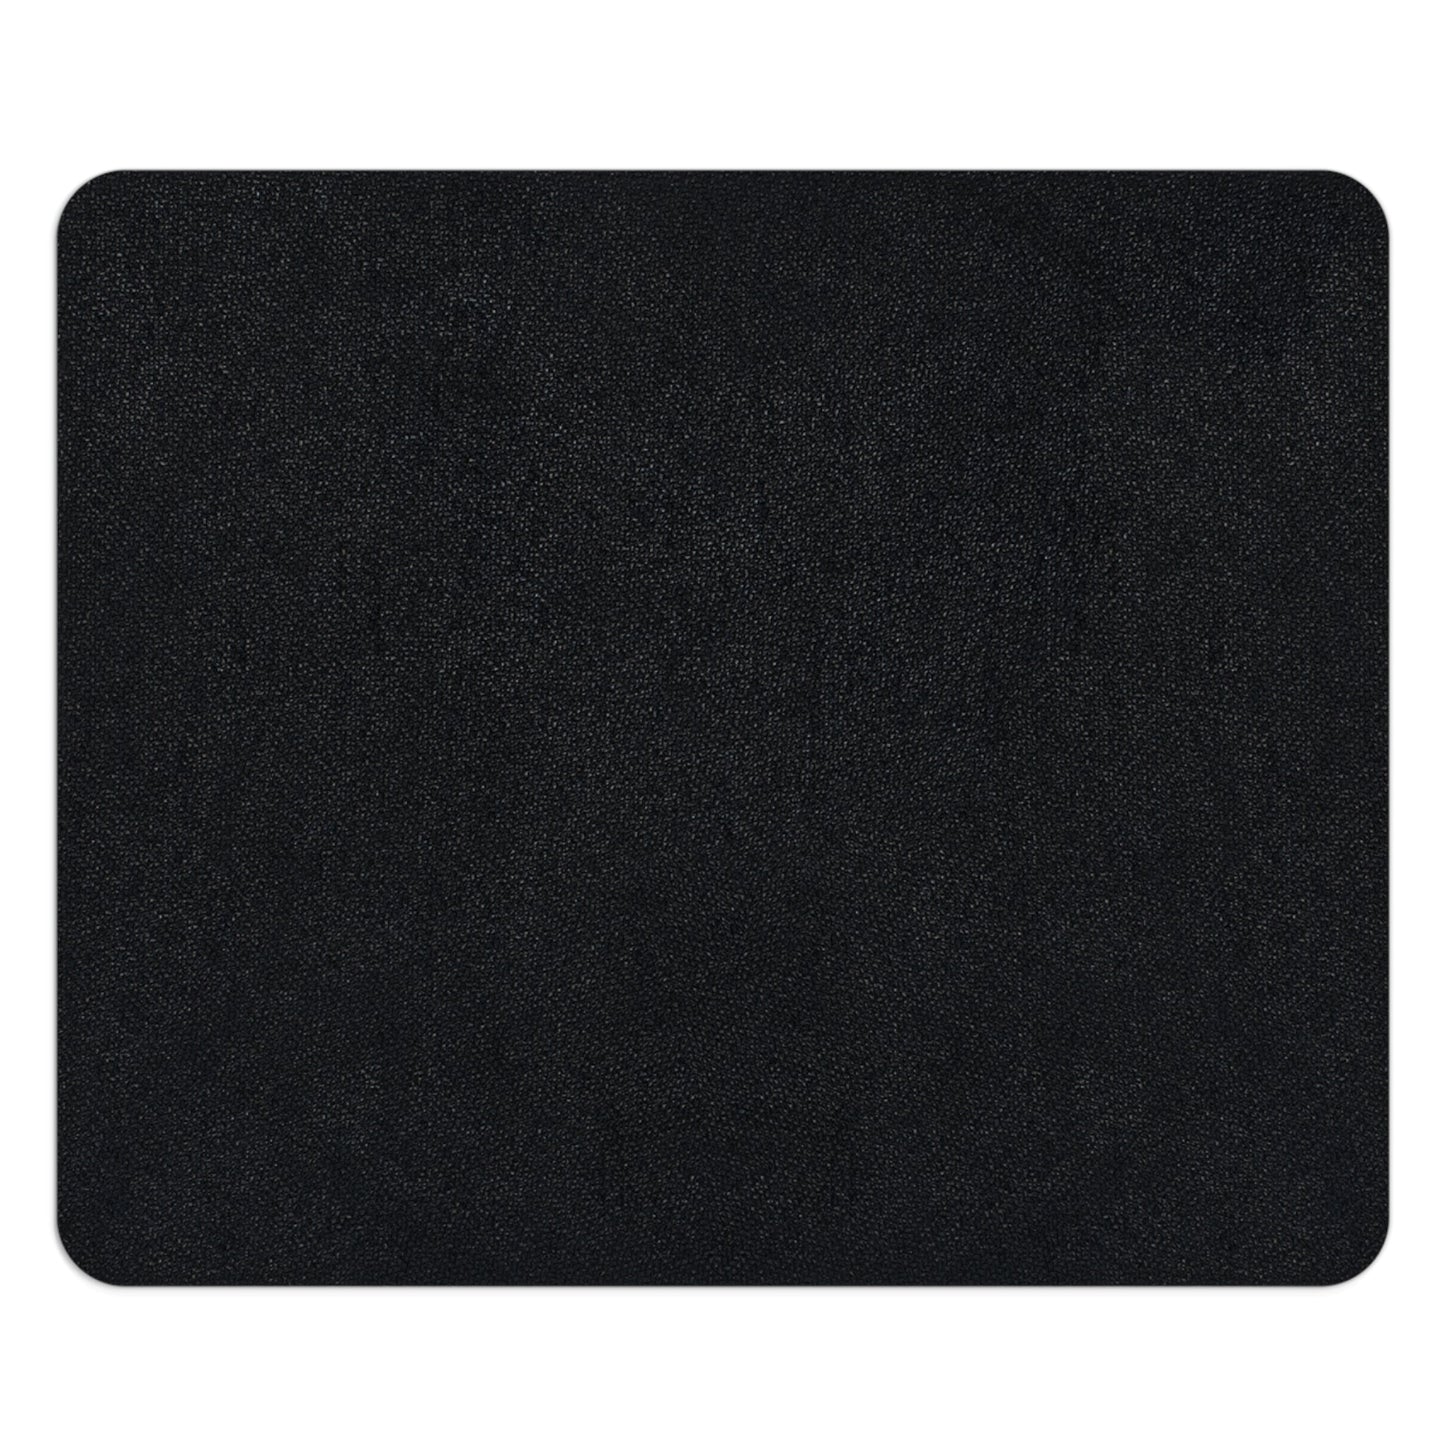 the backside neoprene side of a cannabis mouse pad.